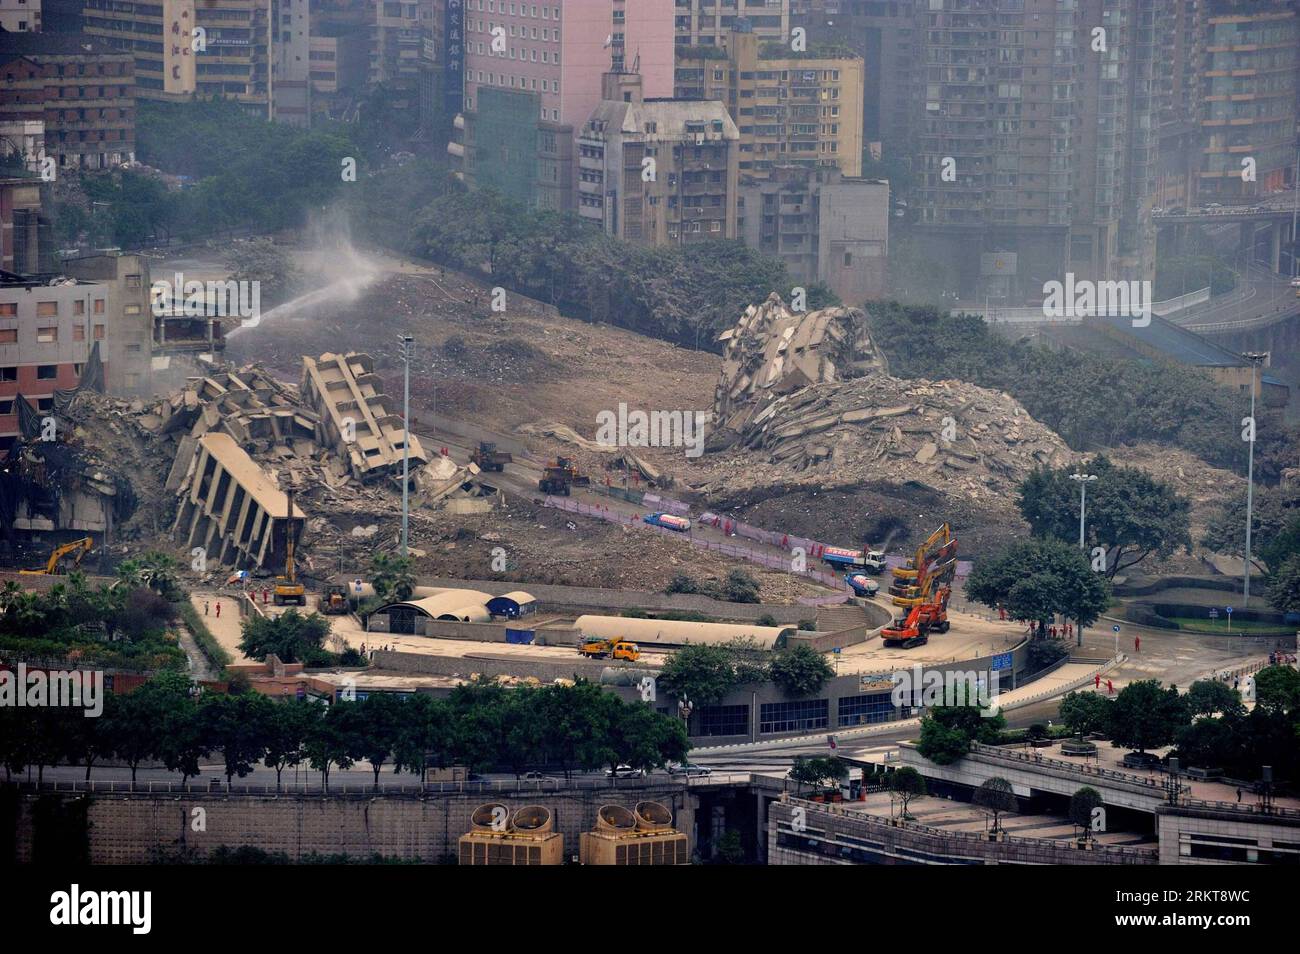 Bildnummer: 58406478  Datum: 30.08.2012  Copyright: imago/Xinhua (120830) -- CHONGQING, Aug. 30, 2012 (Xinhua) -- Excavators are seen at blasting demolition site of the passenger terminal of Chongqing Port and the Three Gorges Hotel in Chongqing, southwest China, Aug. 30, 2012. The 32-storeyed landmark passenger terminal and the hotel, which face the city s Chaotianmen Square, were demolished by directional blasting on Thursday. A new building with complex functions of transportation hub, tourism, trade and business will be built as an improving project of Chaotianmen area. (Xinhua/Li Jian)(mc Stock Photo